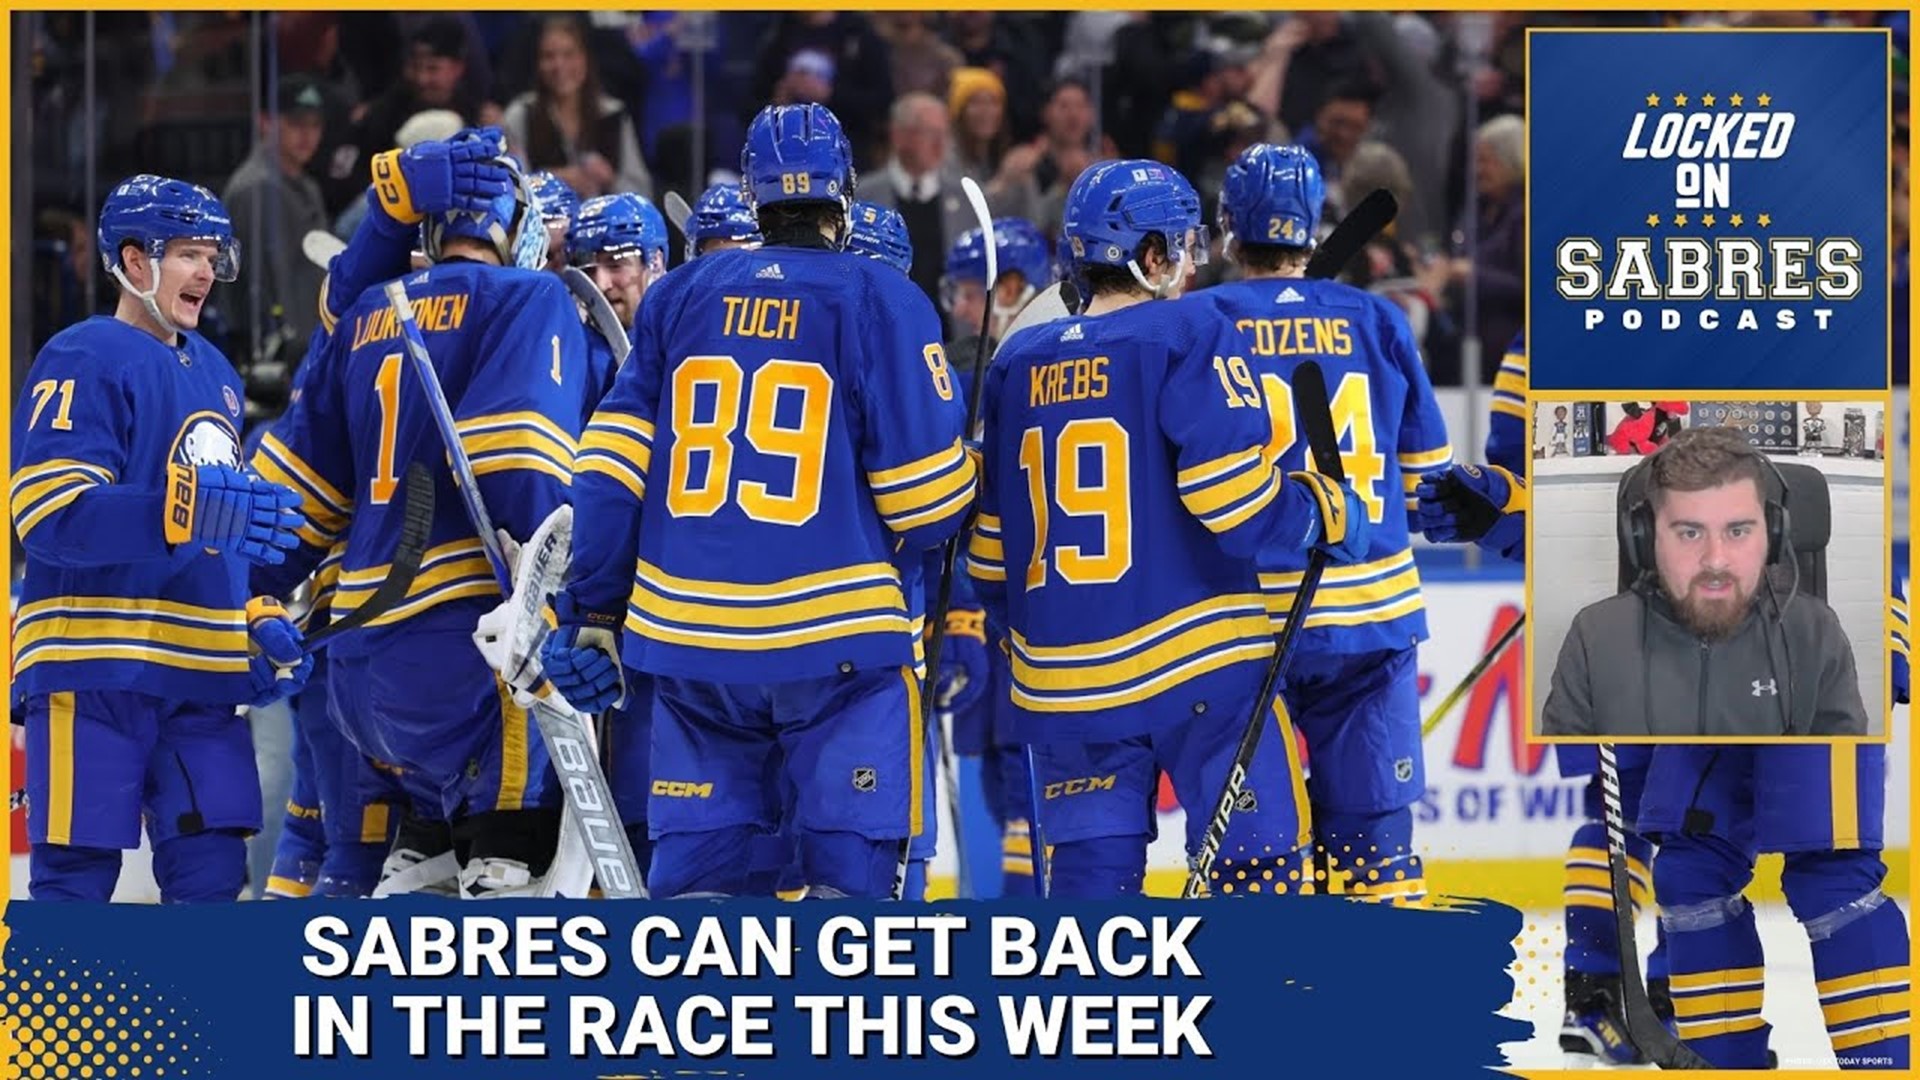 The Sabres can get back in the playoff race this week